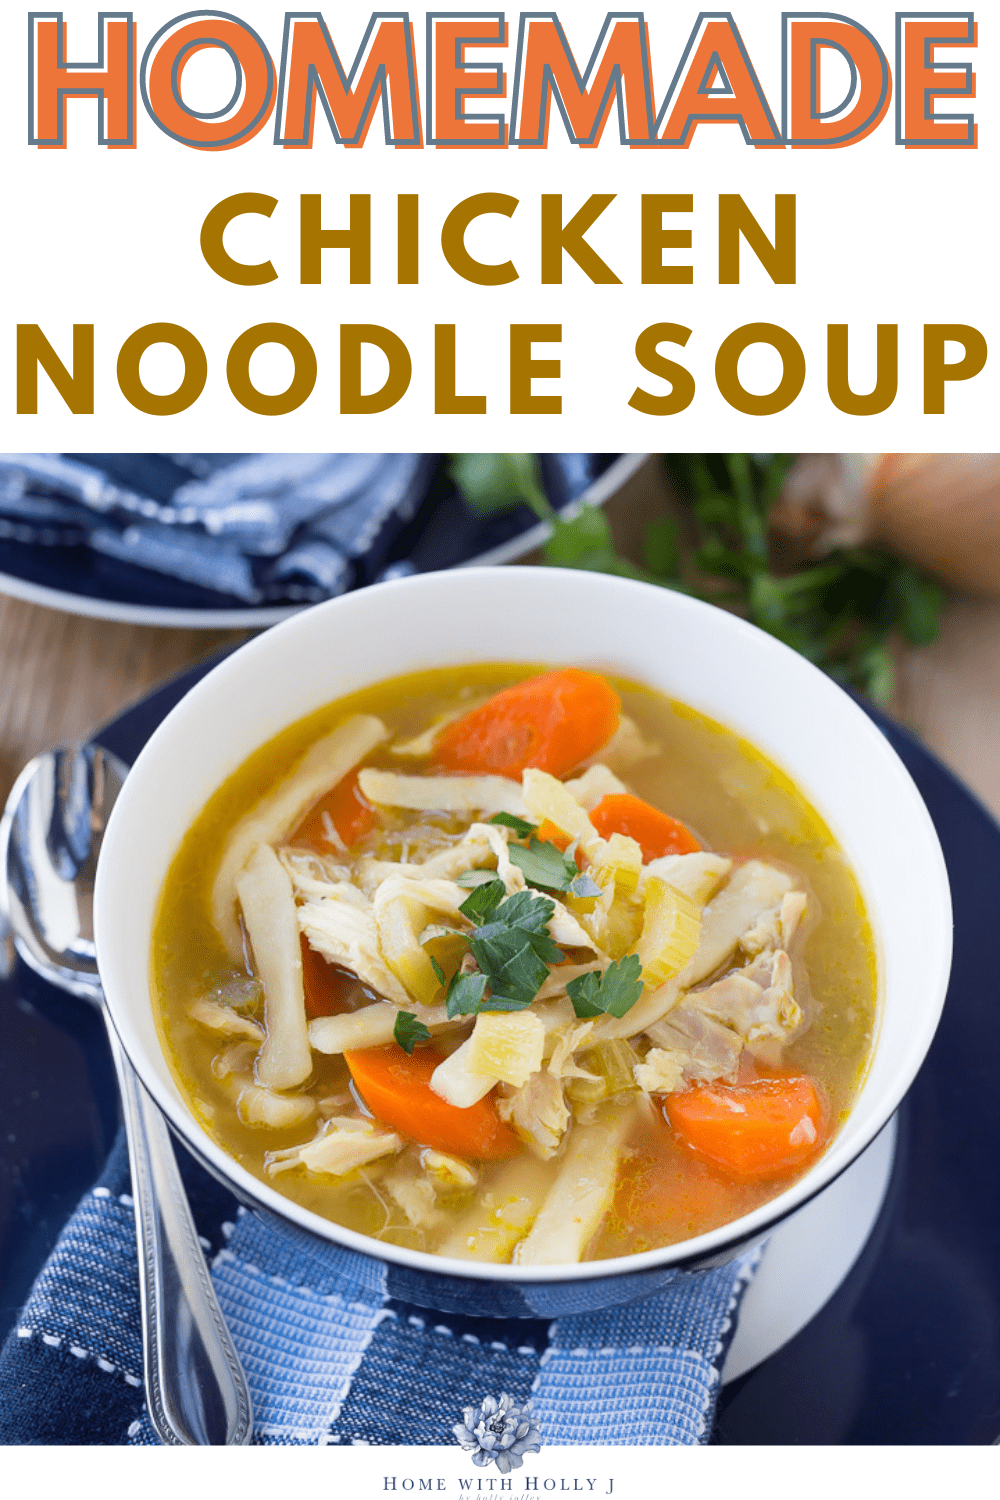 Delicious and comforting homemade chicken noodle soup recipe. Warm up with this classic dish packed with flavorful ingredients. Get it here.